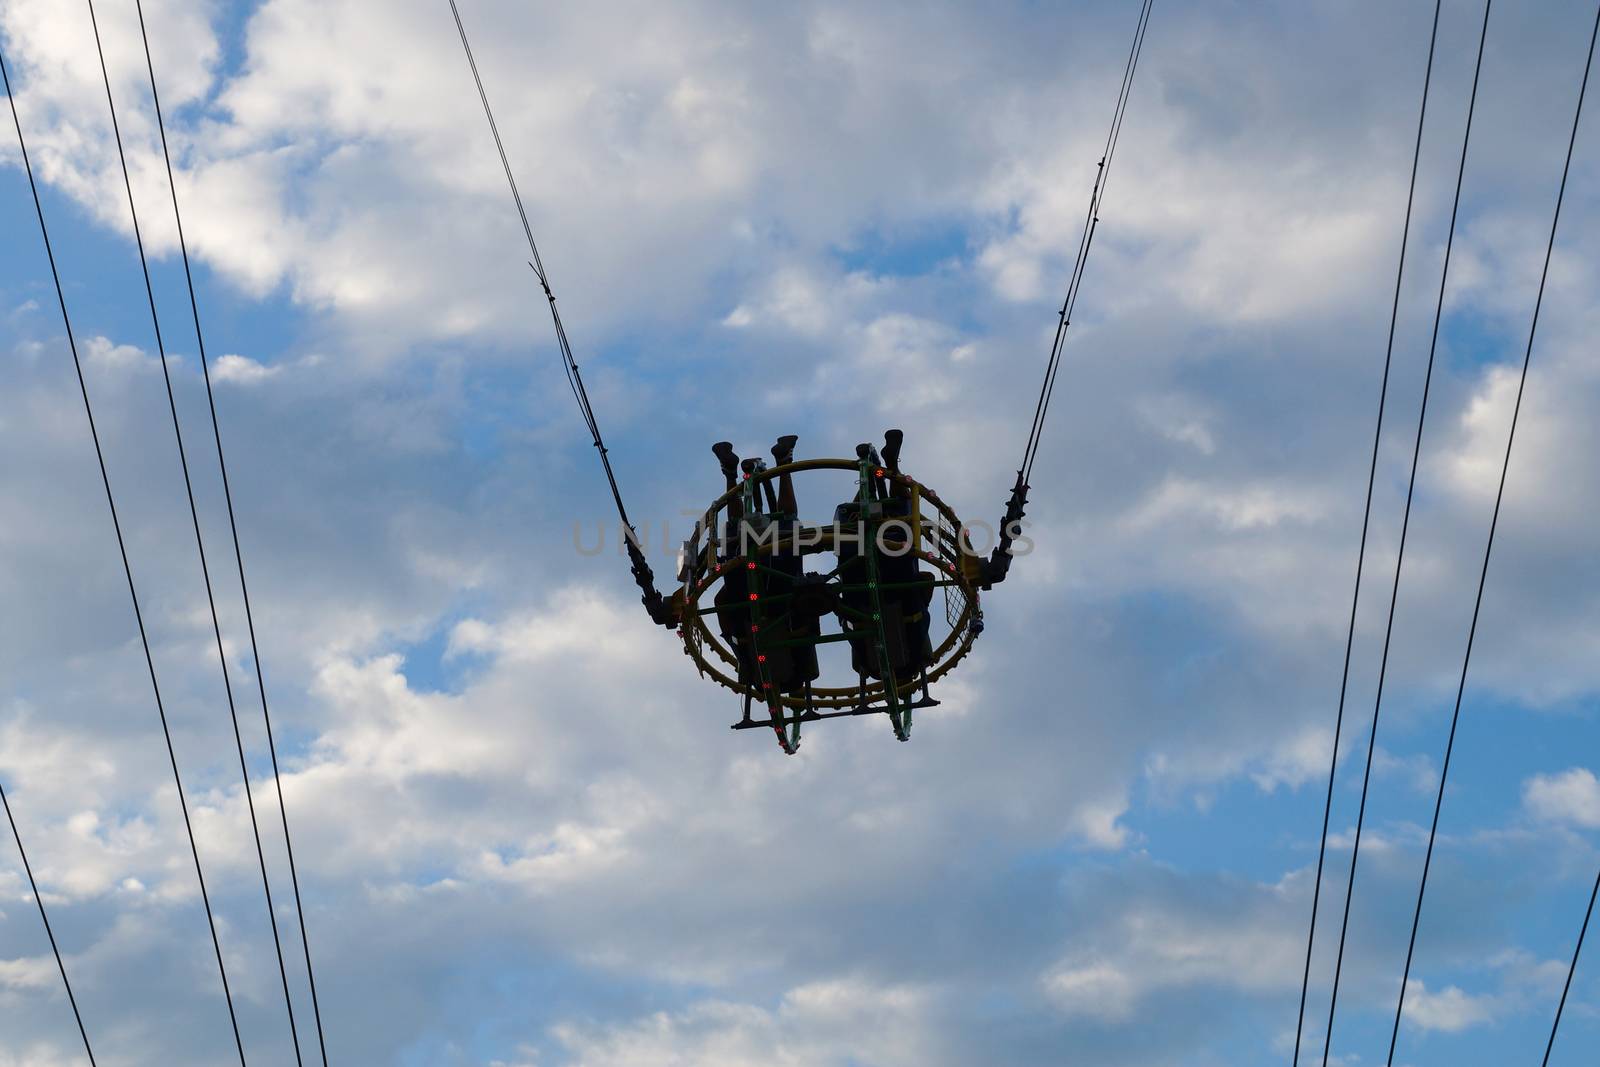 two people on the bungee ride bottom view by Annado